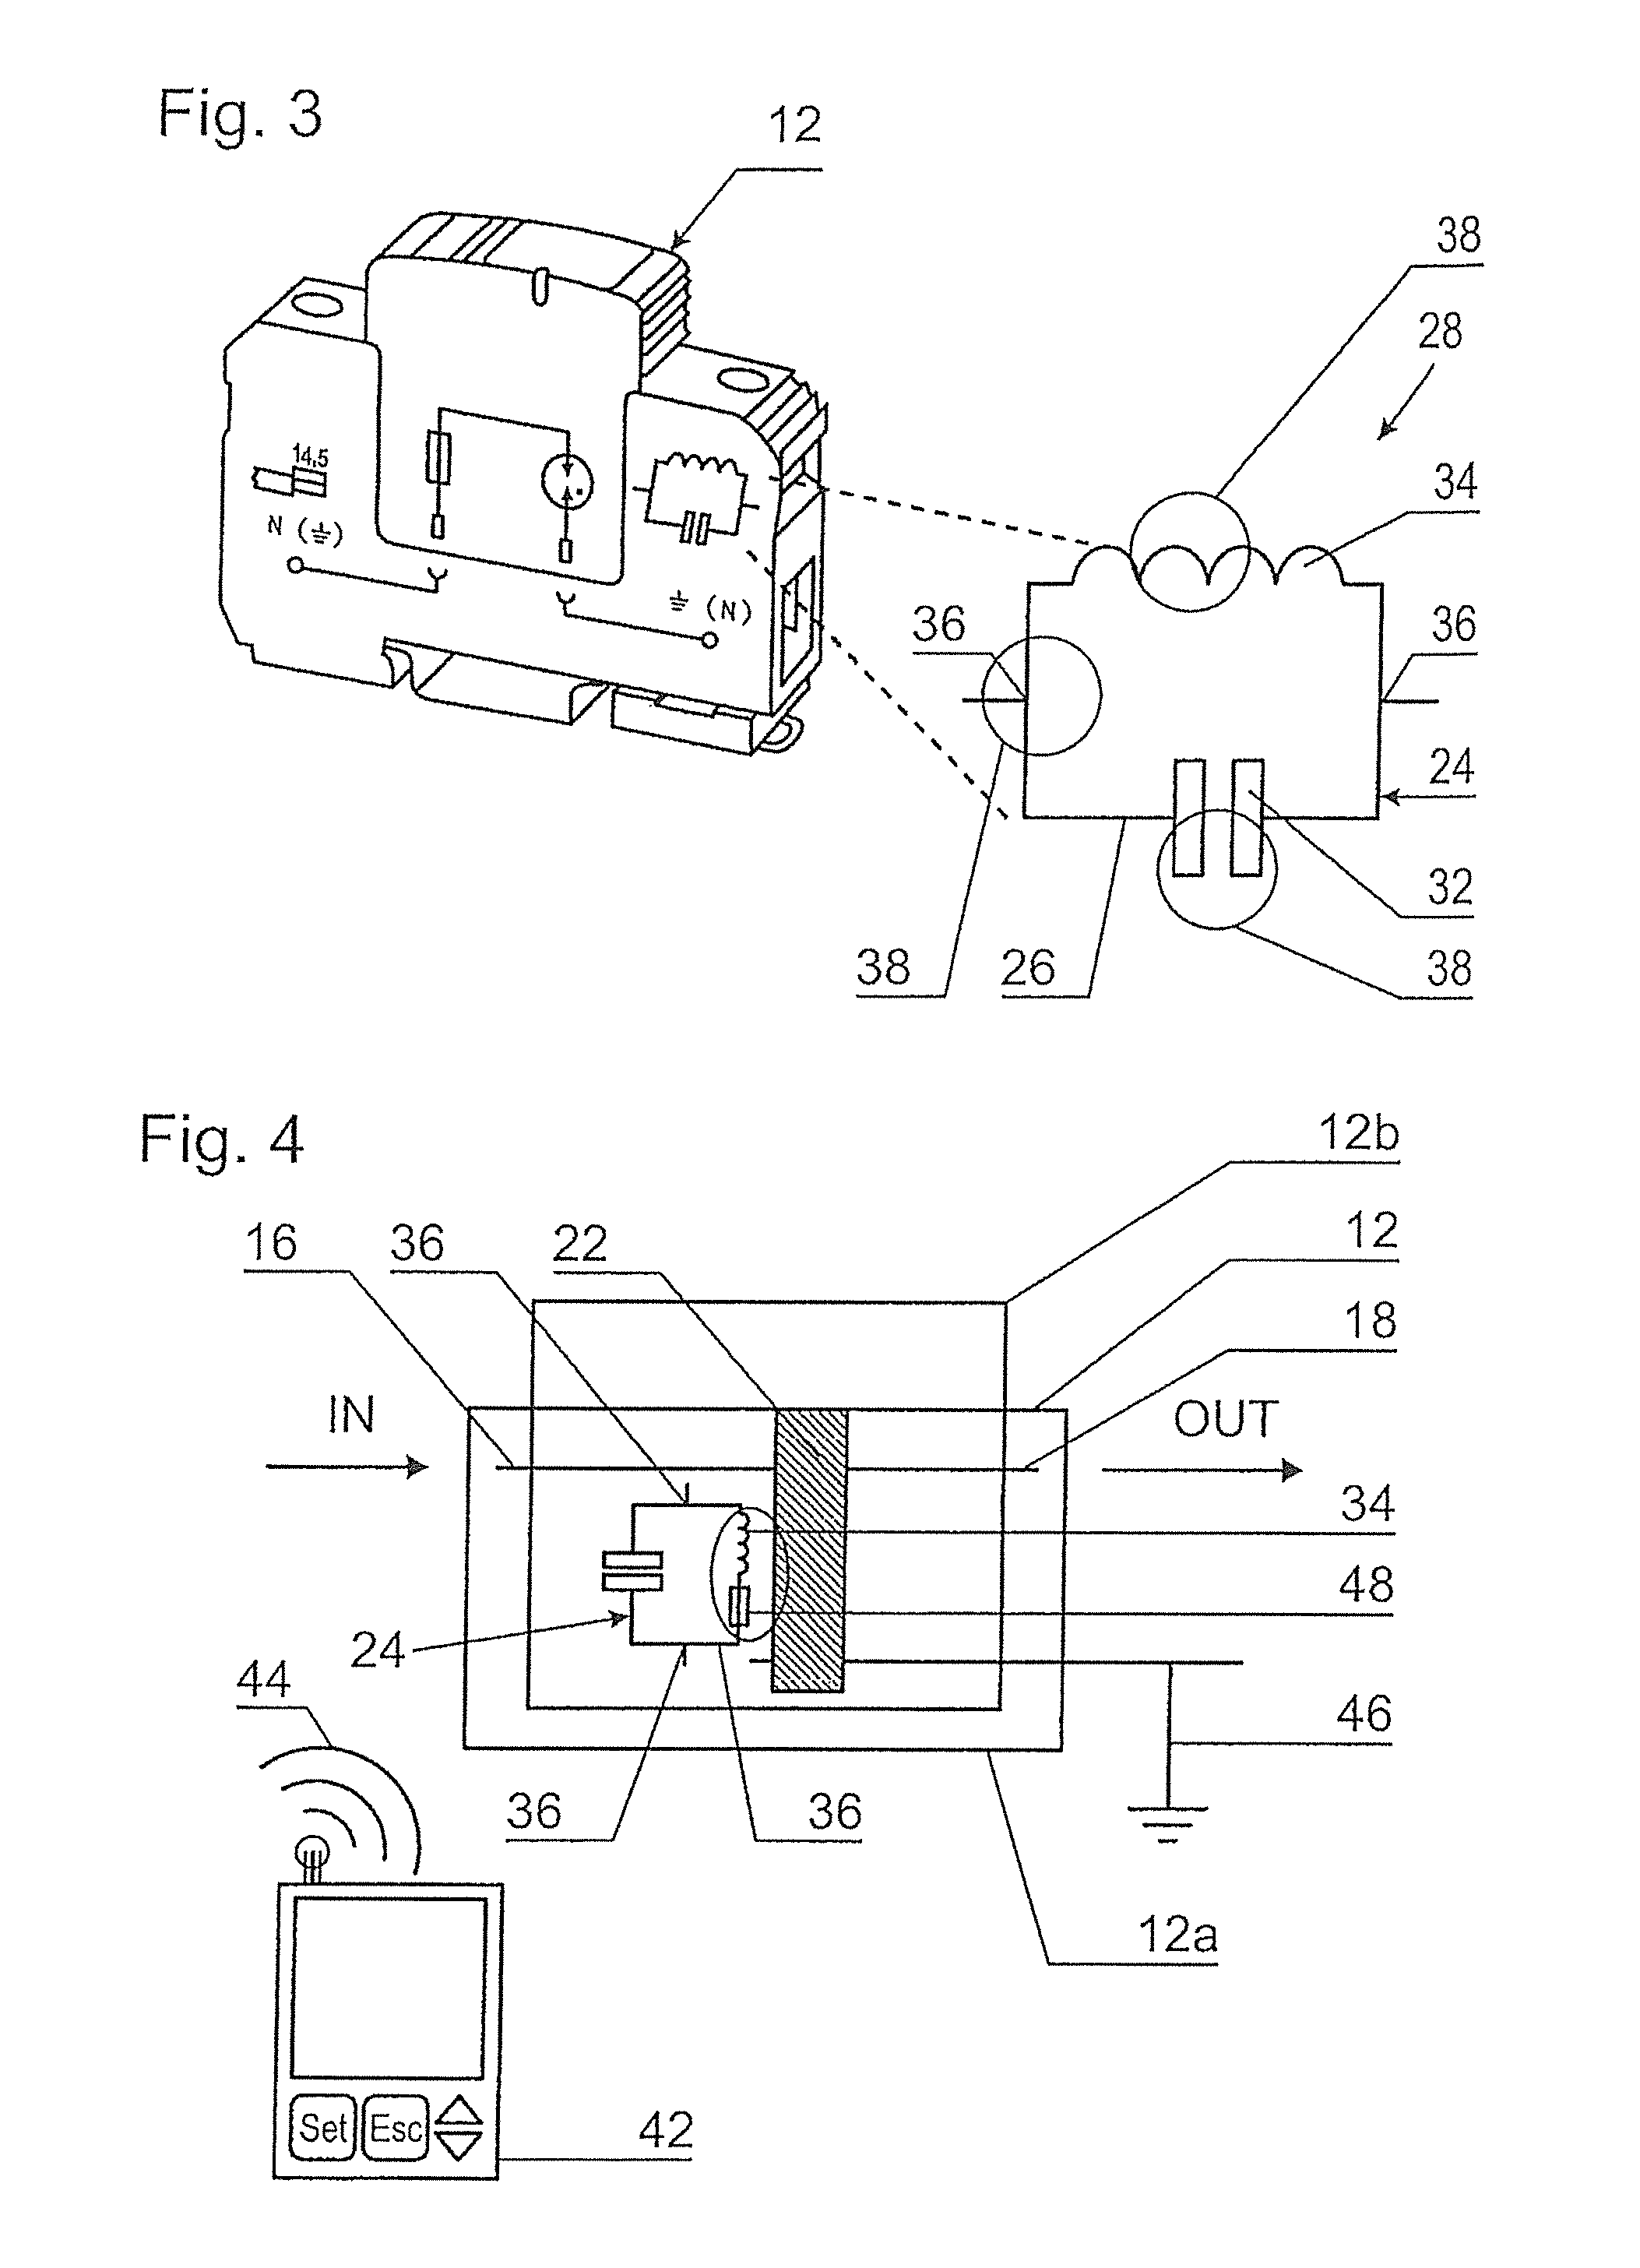 State monitoring or diagnostics system